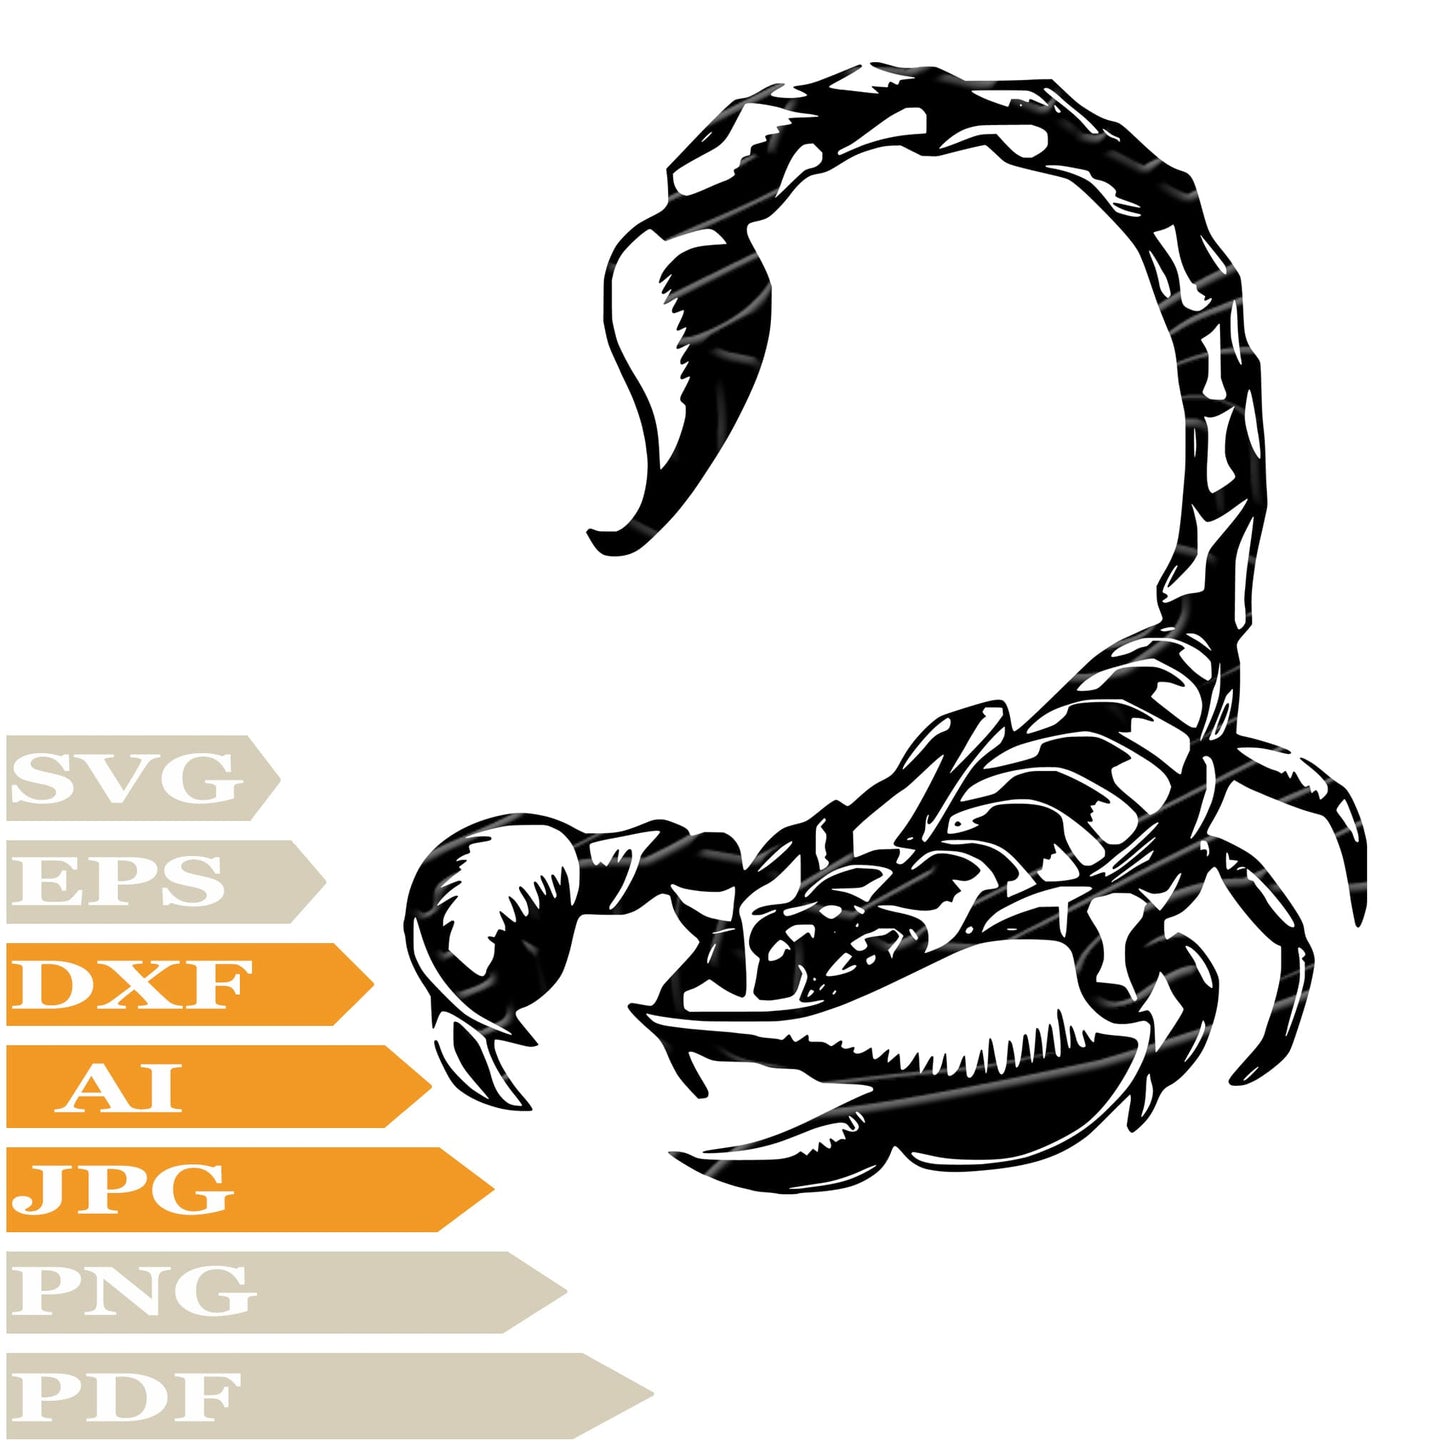 Scorpion Svg File, Imperial Scorpion Svg Design, Poisonous Scorpion Clipart, Cut File, Imperial Scorpion Vector Graphics, Scorpions Svg For Tattoo, Imperial Scorpion Svg For Cricut, Poisonous Scorpion Svg For Silhouette